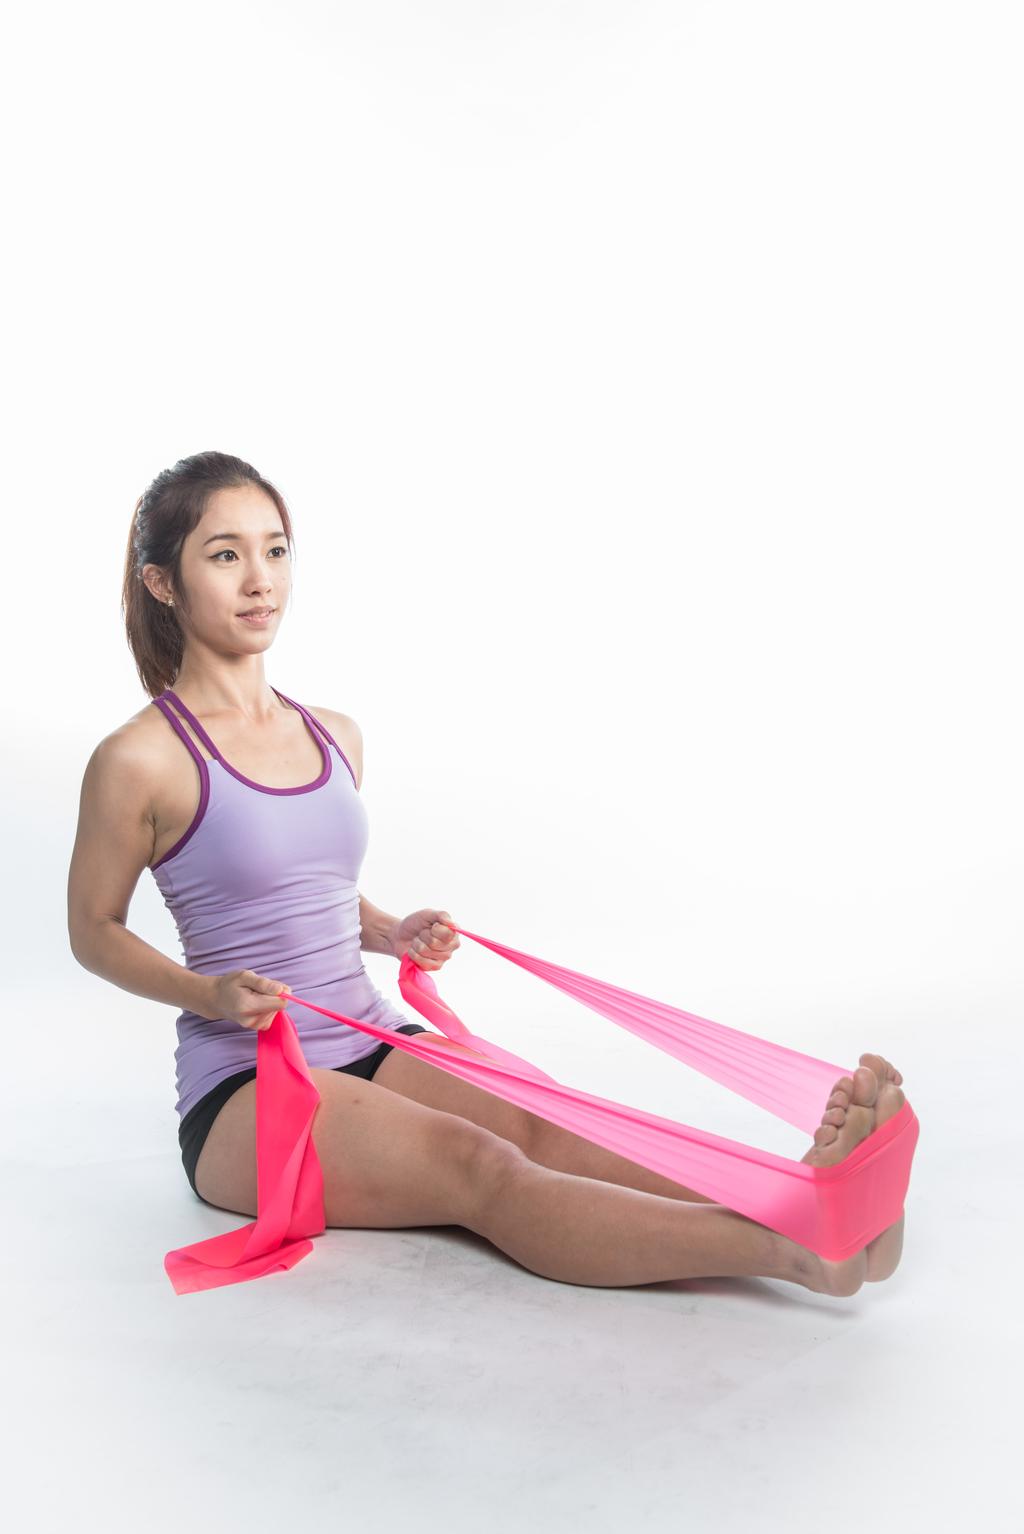 Introduction Information for Healthcare Professionals Indications resistance bands and tubing are low-cost, portable and versatile.